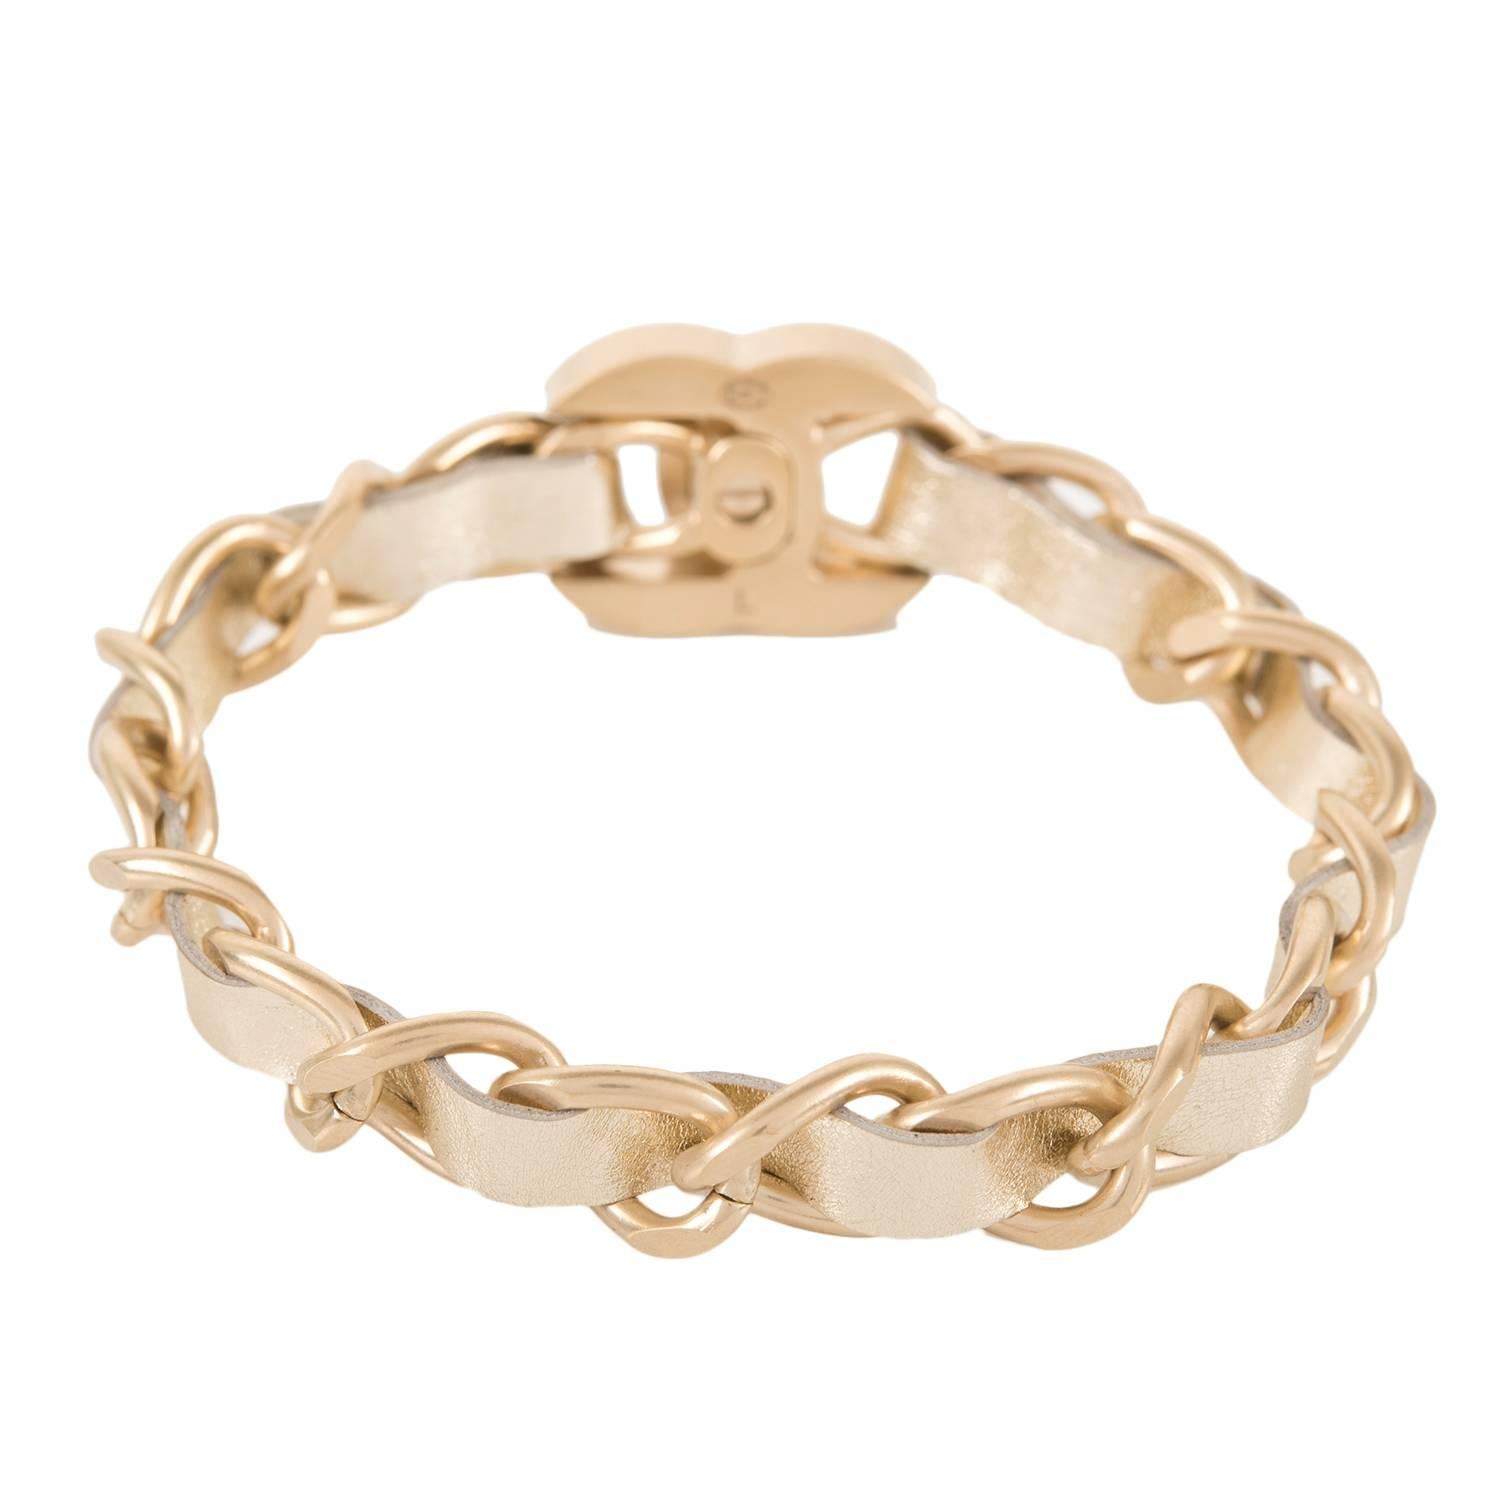 Chanel bracelet of gold metallic leather interwoven with matte gold tone chain link with iconic CC-logo at front and turn lock closure.

Collection: 16V (2016 collection)

Condition: Pristine; never worn

Accompanied By: Chanel box, dustbag,